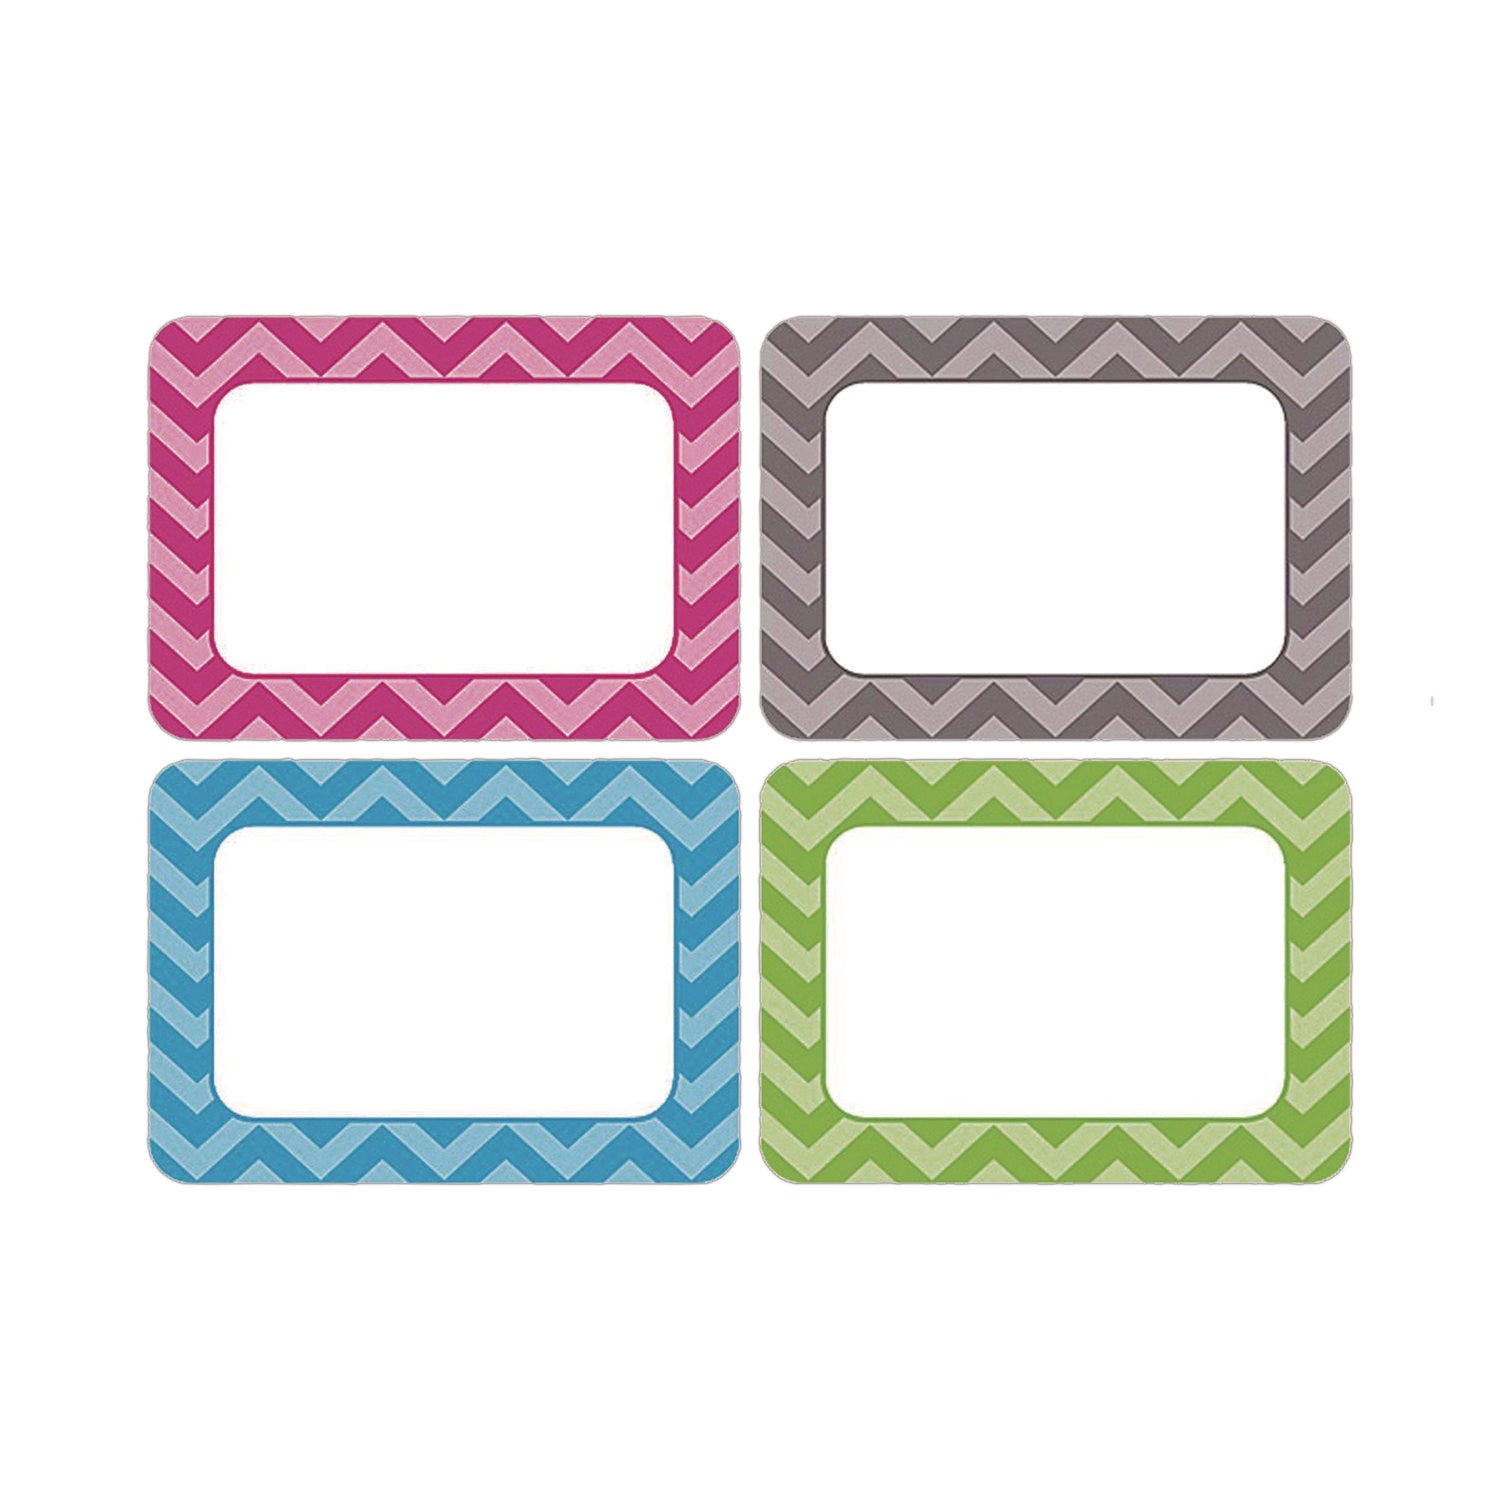 all-grade-self-adhesive-name-tags-35-x-25-chevron-border-design-assorted-colors-36-pack_tcr5526 - 1